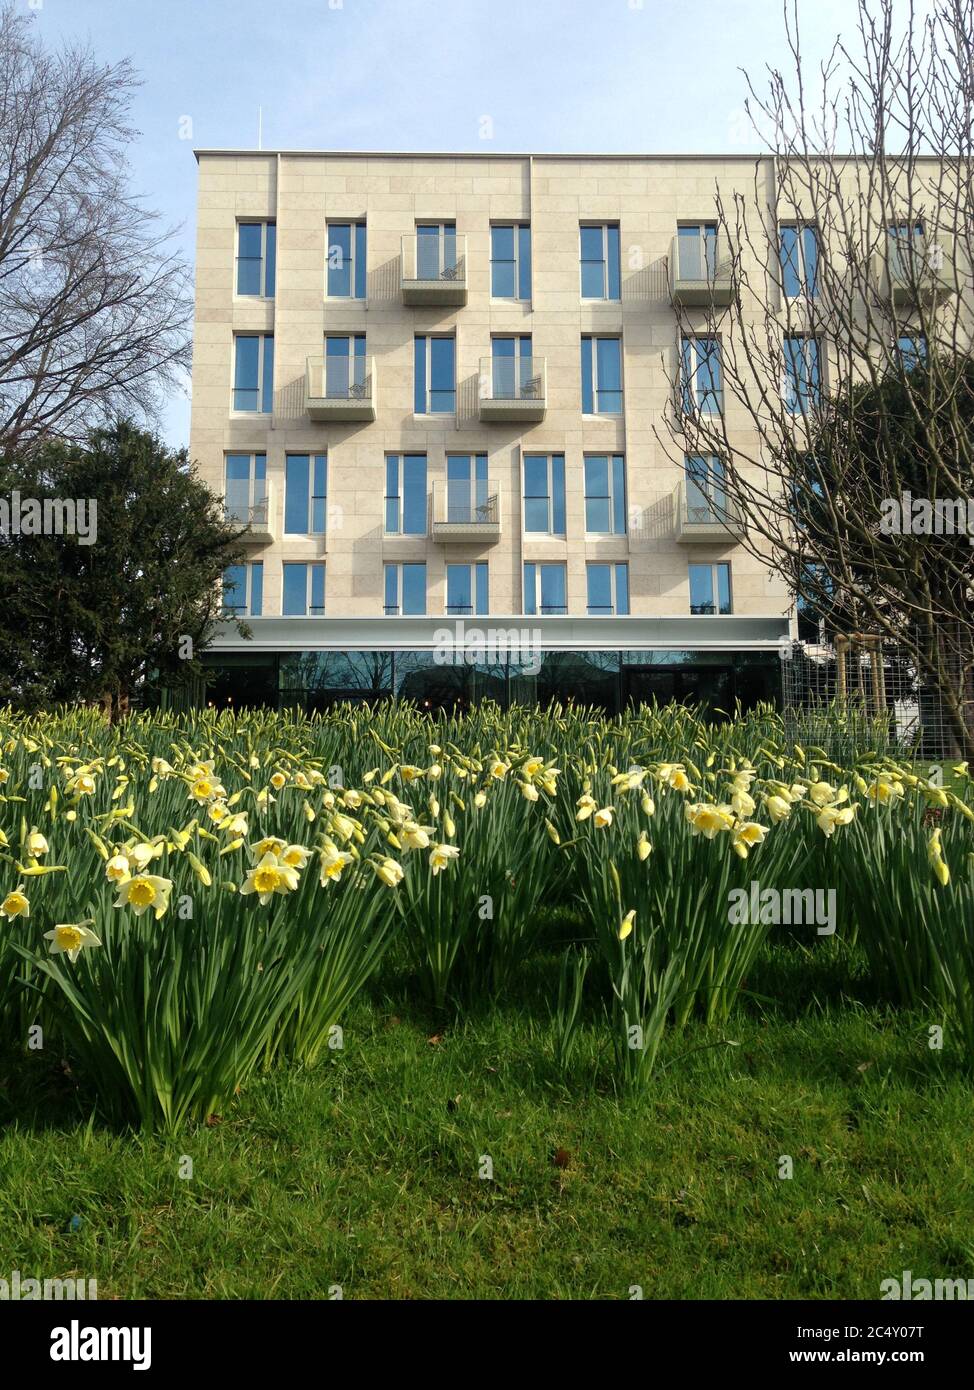 Hotel Mauritzhof in Muenster, Germany in spring with daffodils in front. Stock Photo